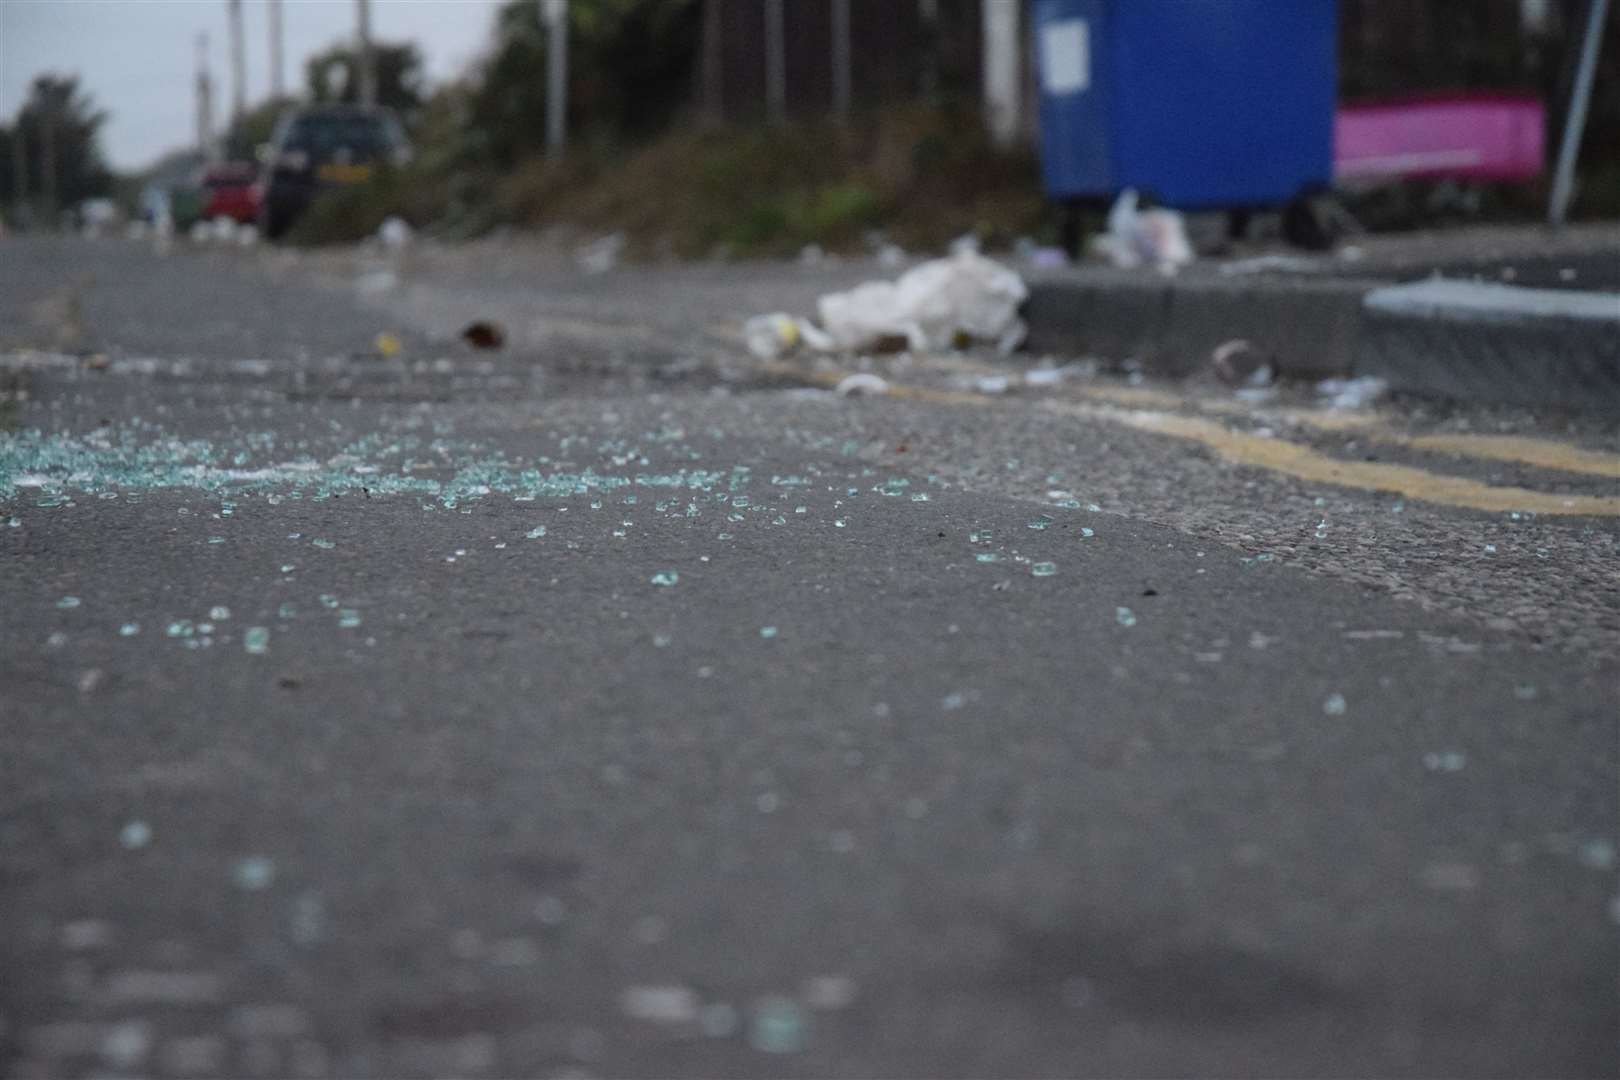 Broken glass left on the roads near the beach Picture: Pd Photography